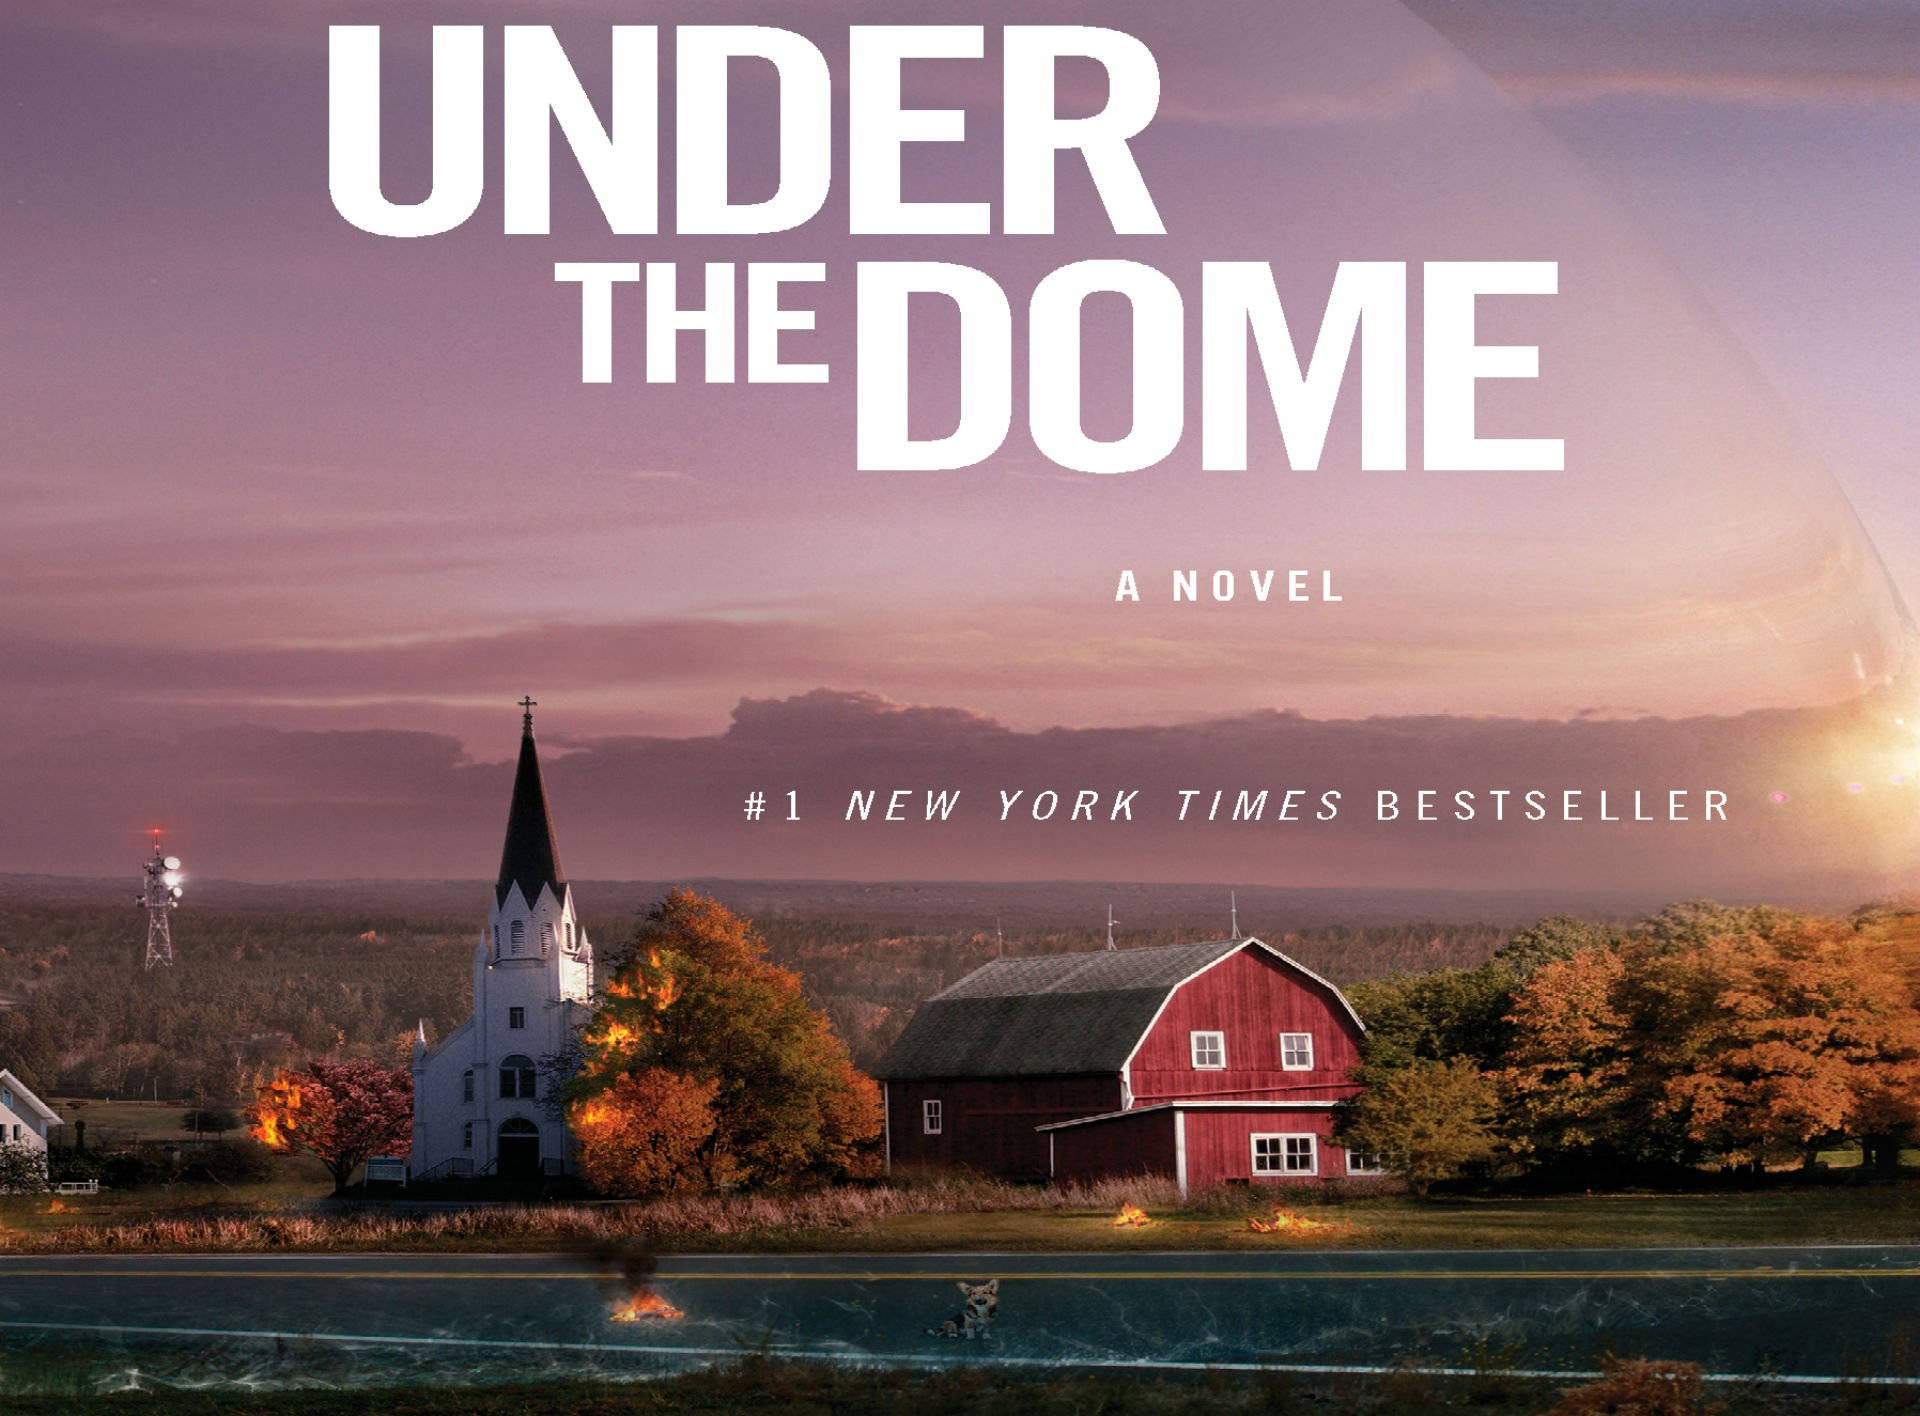 Under The Dome Book Cover Wallpaper